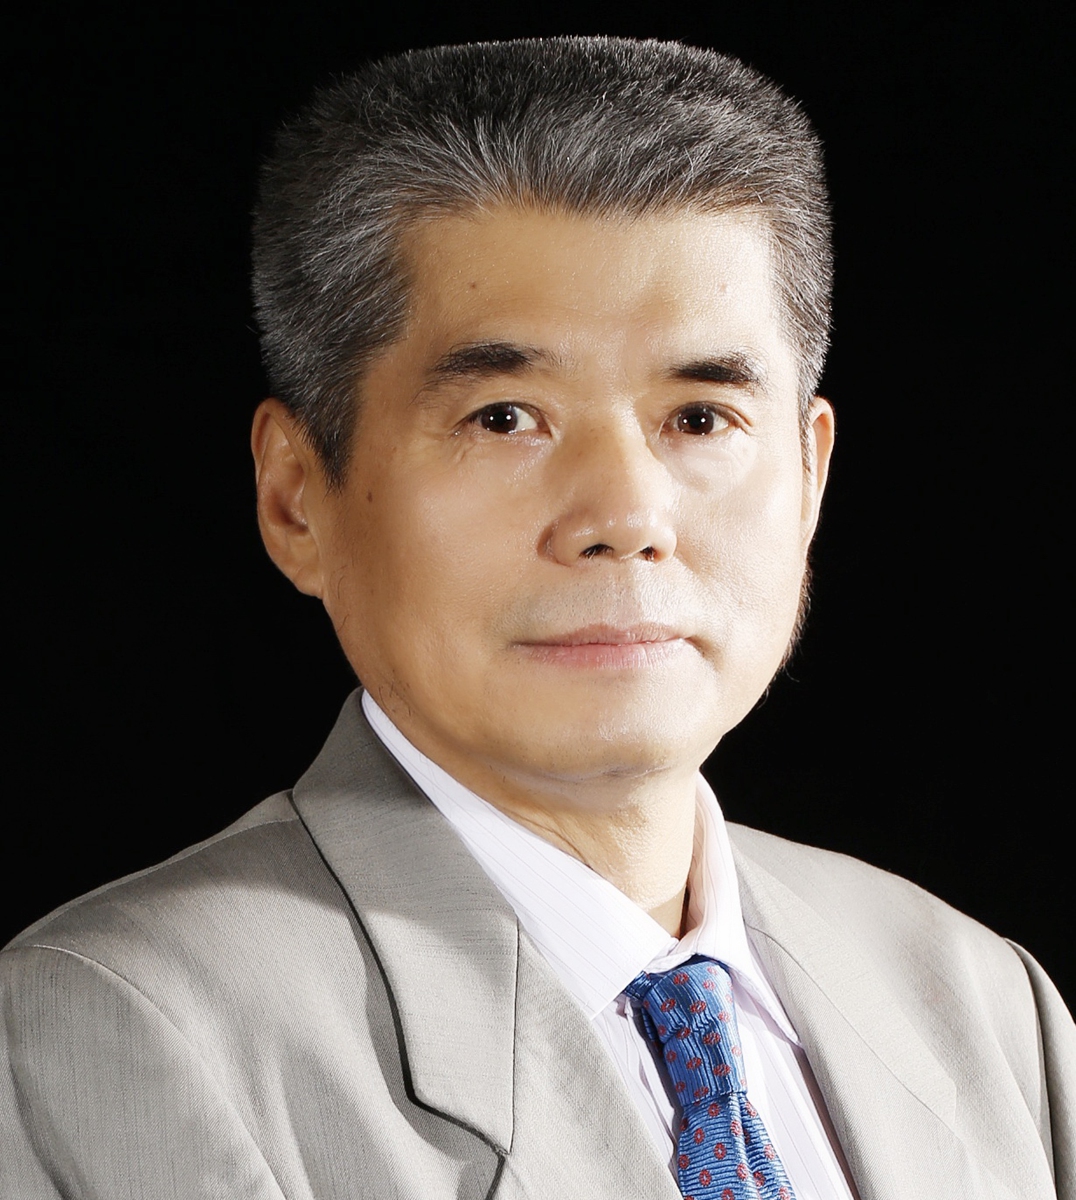 Pan Weimin,<strong>25mm globe valve manufacturer</strong> researcher from the Institute of High Energy Physics, Chinese Academy of Sciences Photo: Courtesy of Pan Weimin